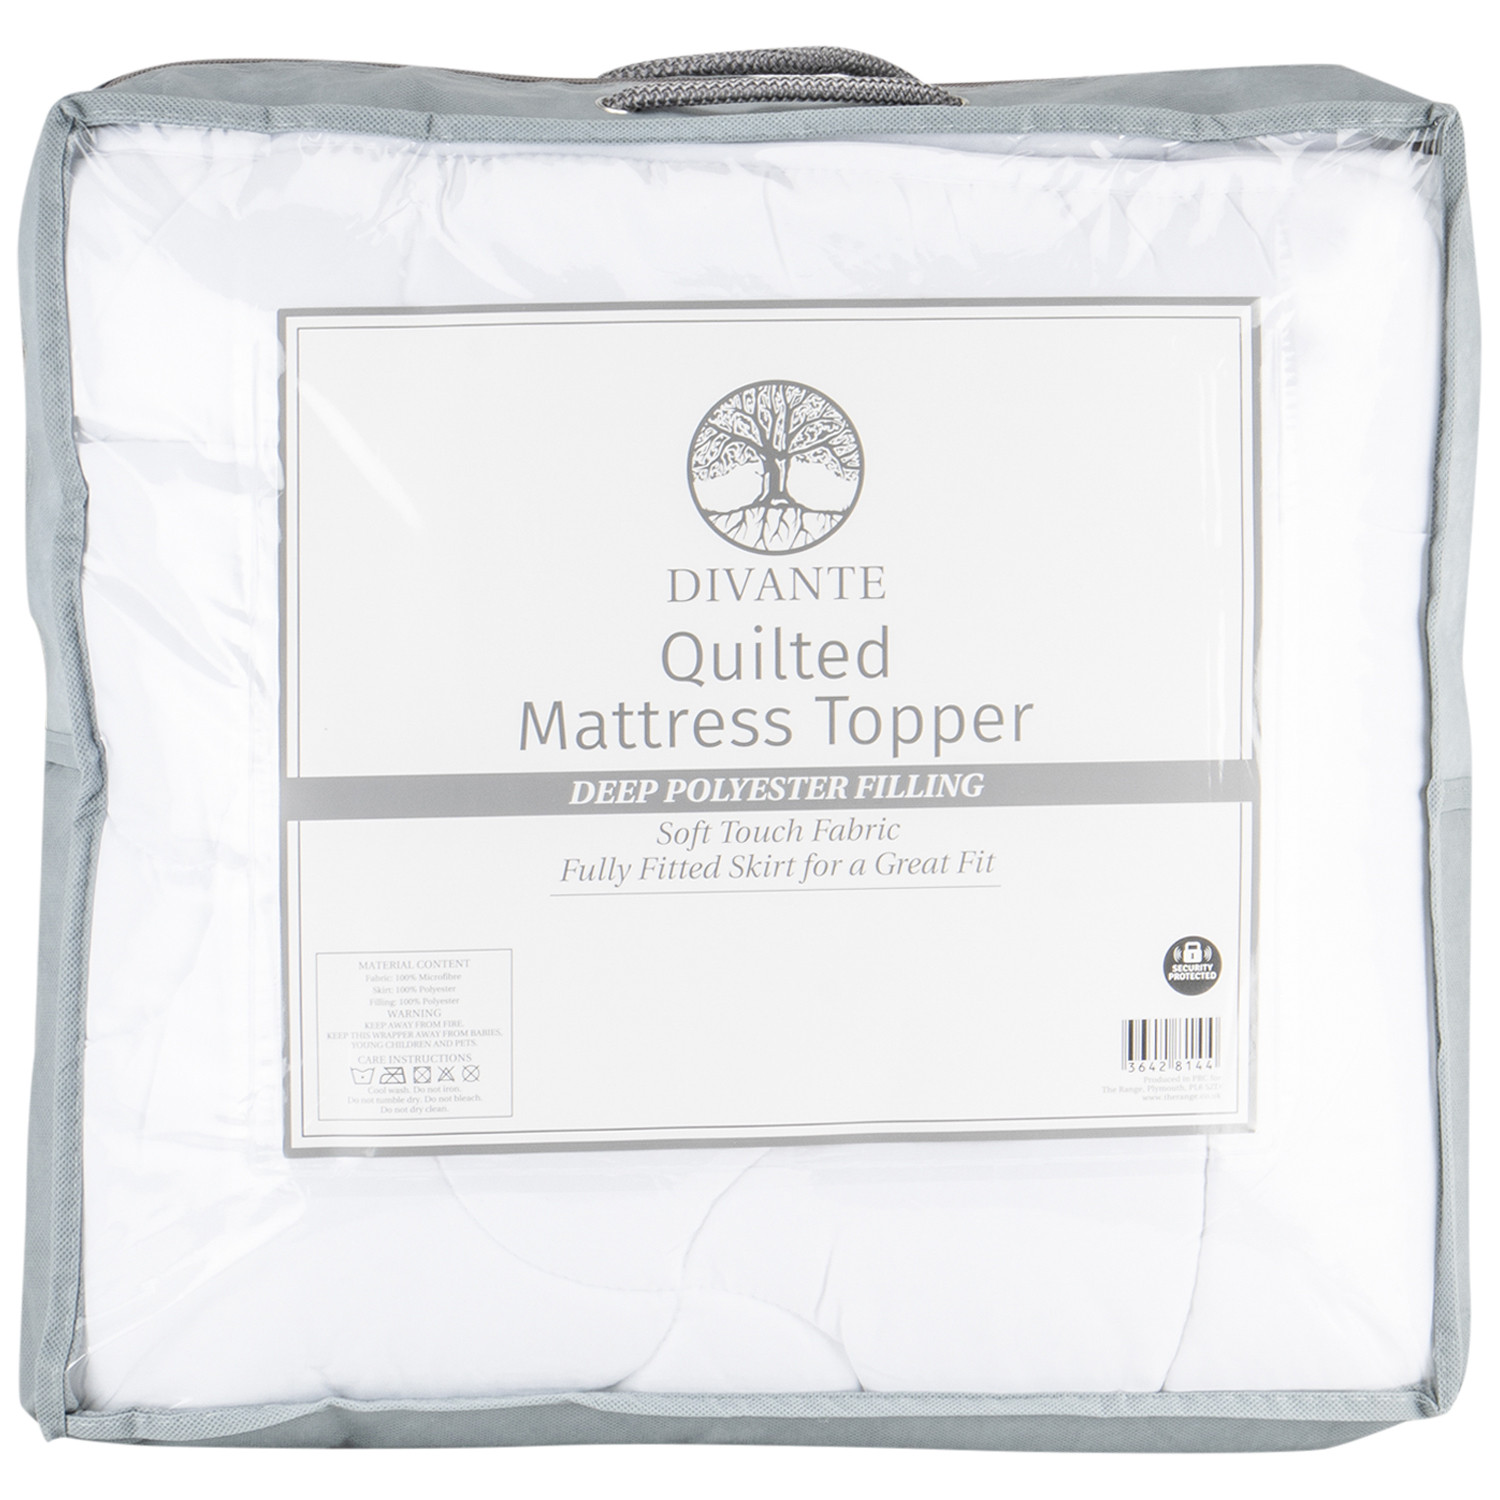 Divante King Size Quilted Mattress Topper Image